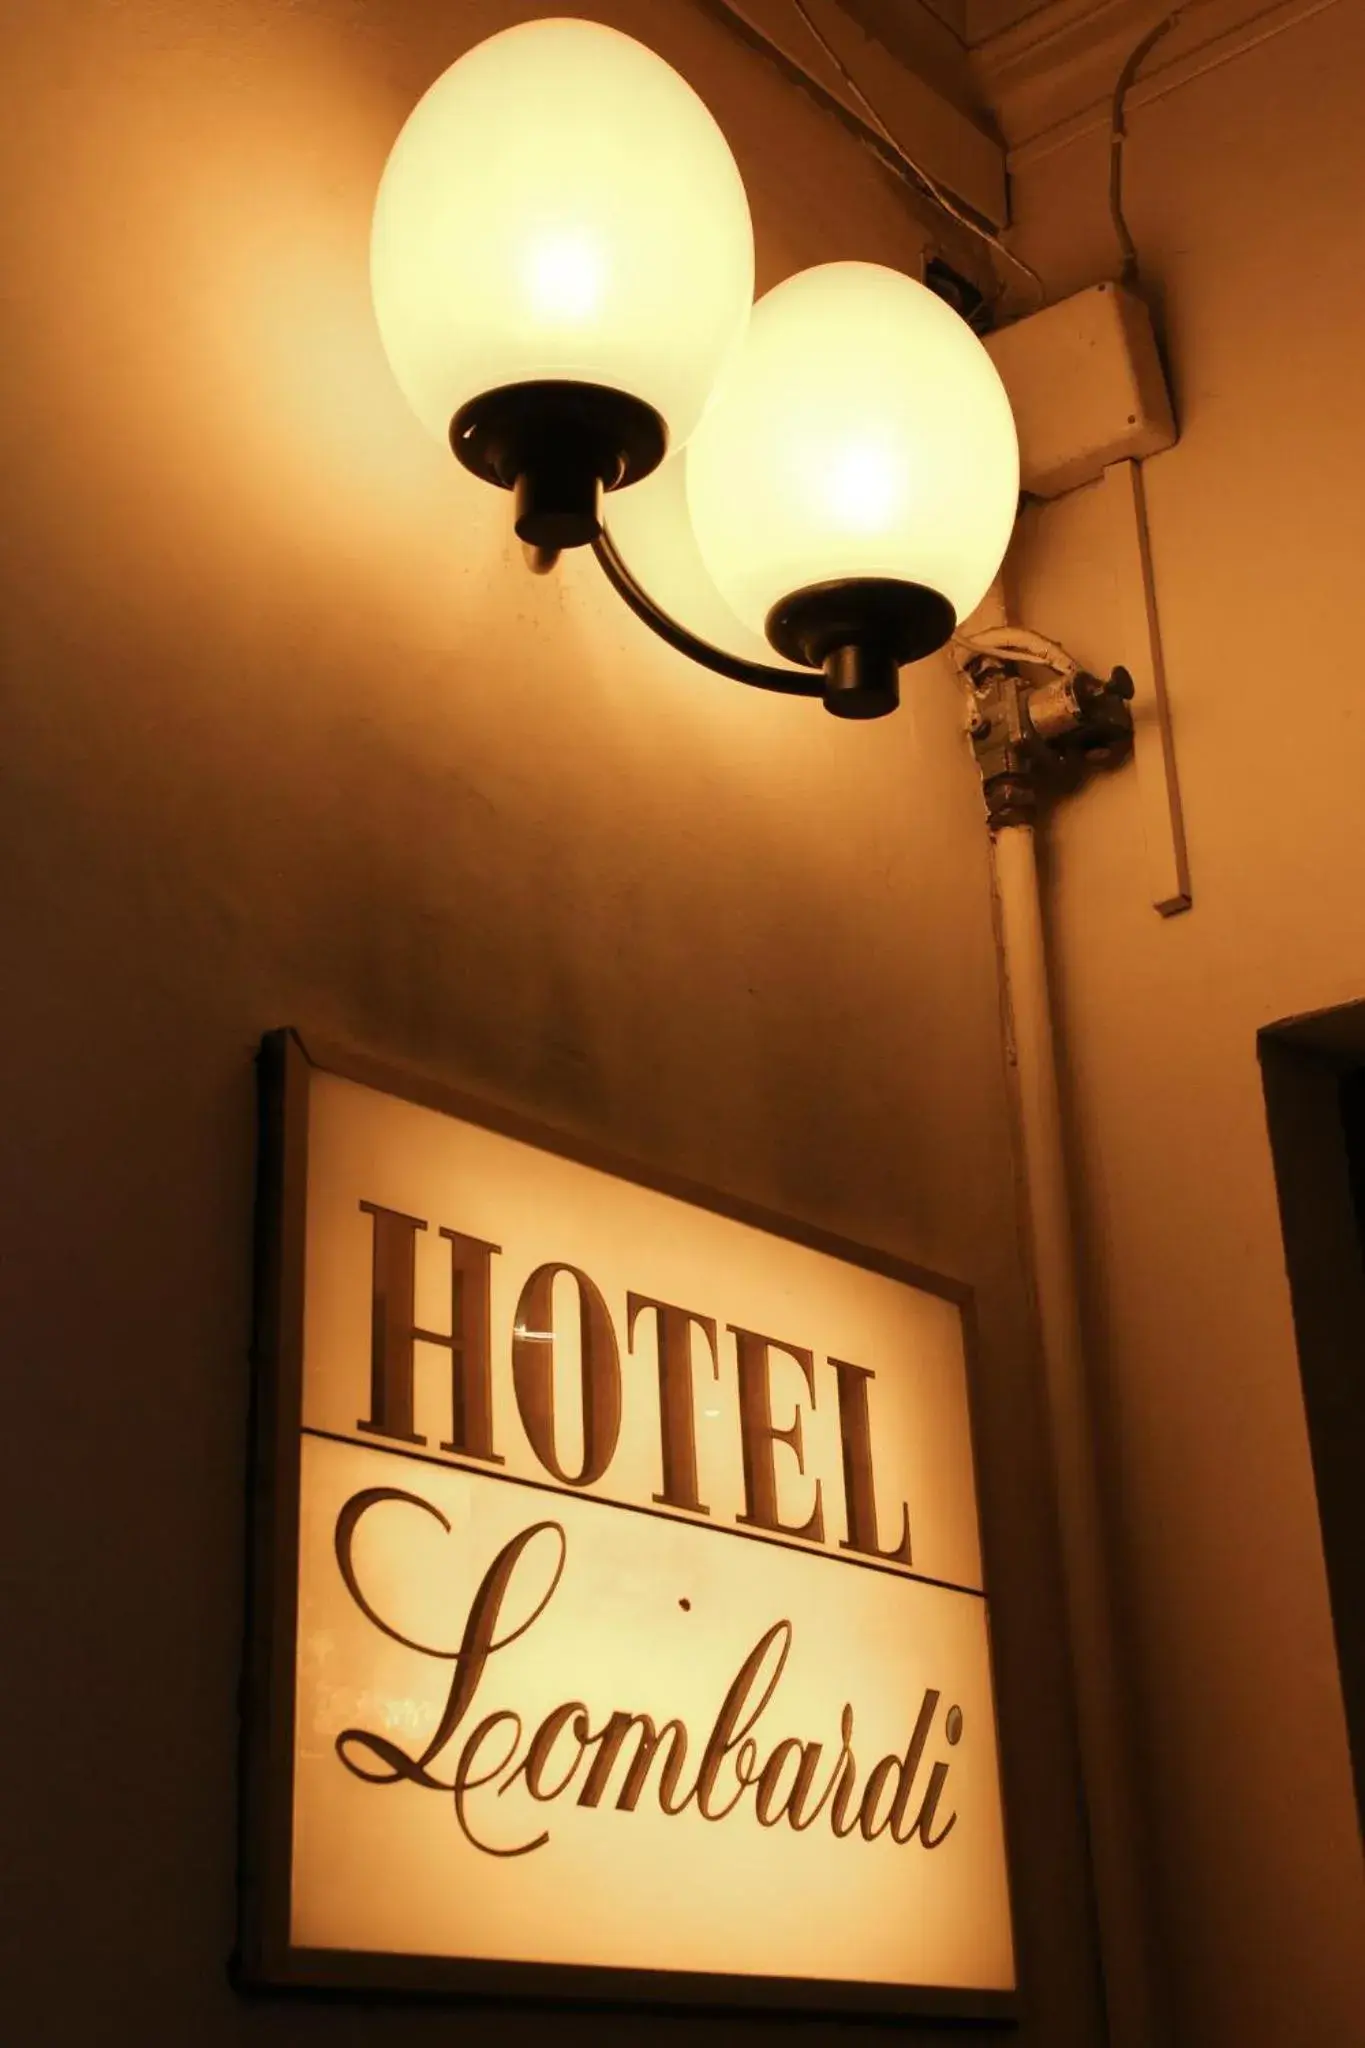 Property logo or sign in Hotel Lombardi